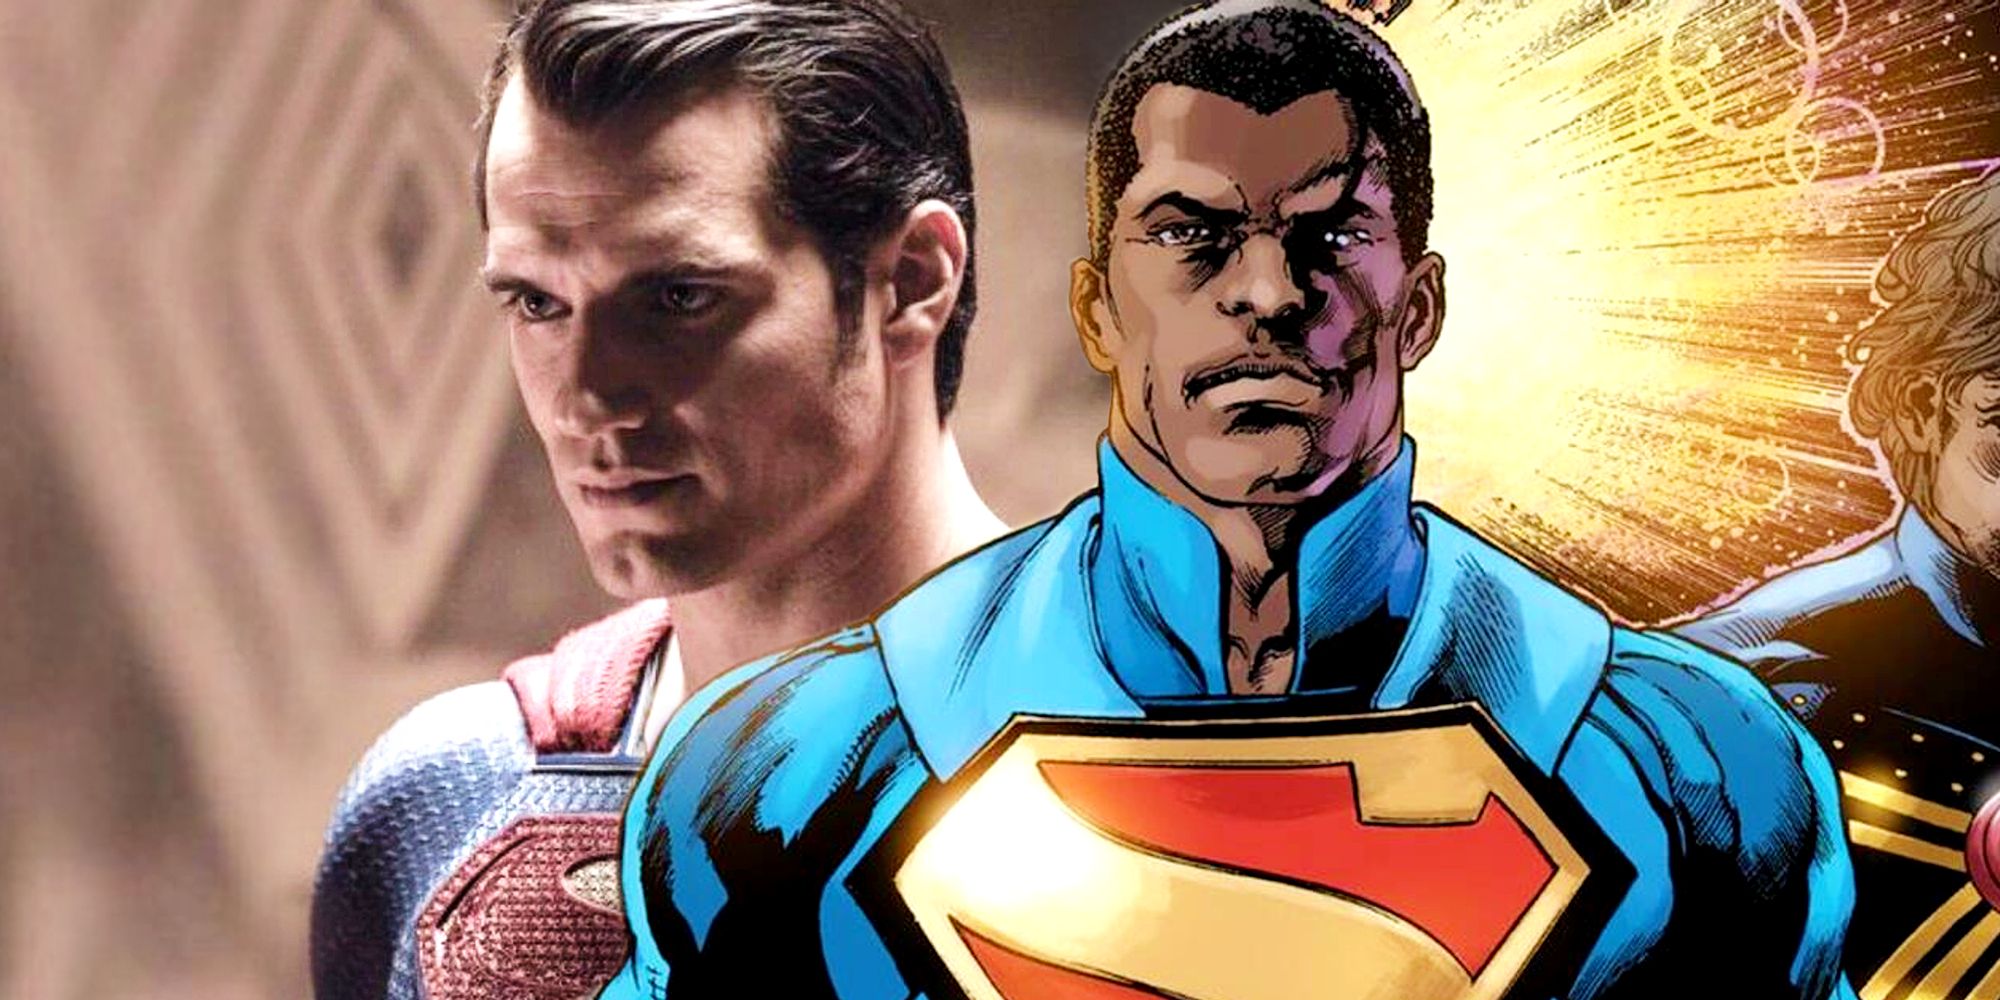 Henry Cavills Superman in the DCEU and Val Zod in DC Comics